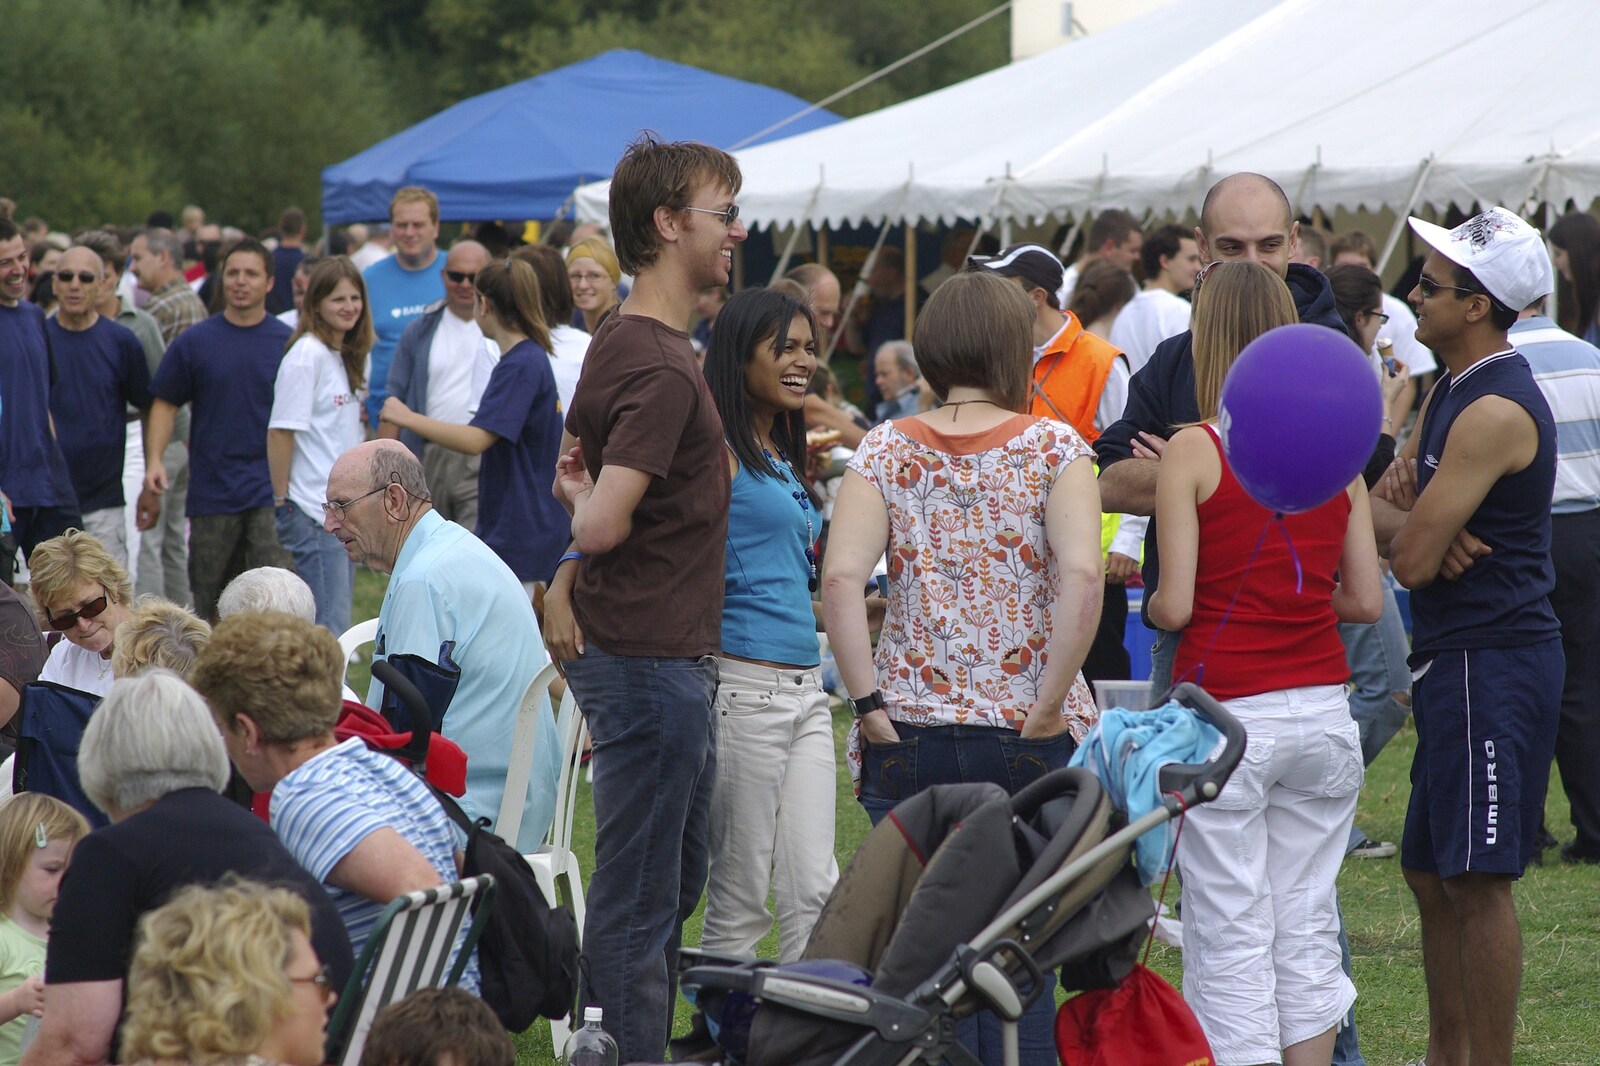 More crowds from Qualcomm's Dragon-Boat Racing, Fen Ditton, Cambridge - 8th September 2007